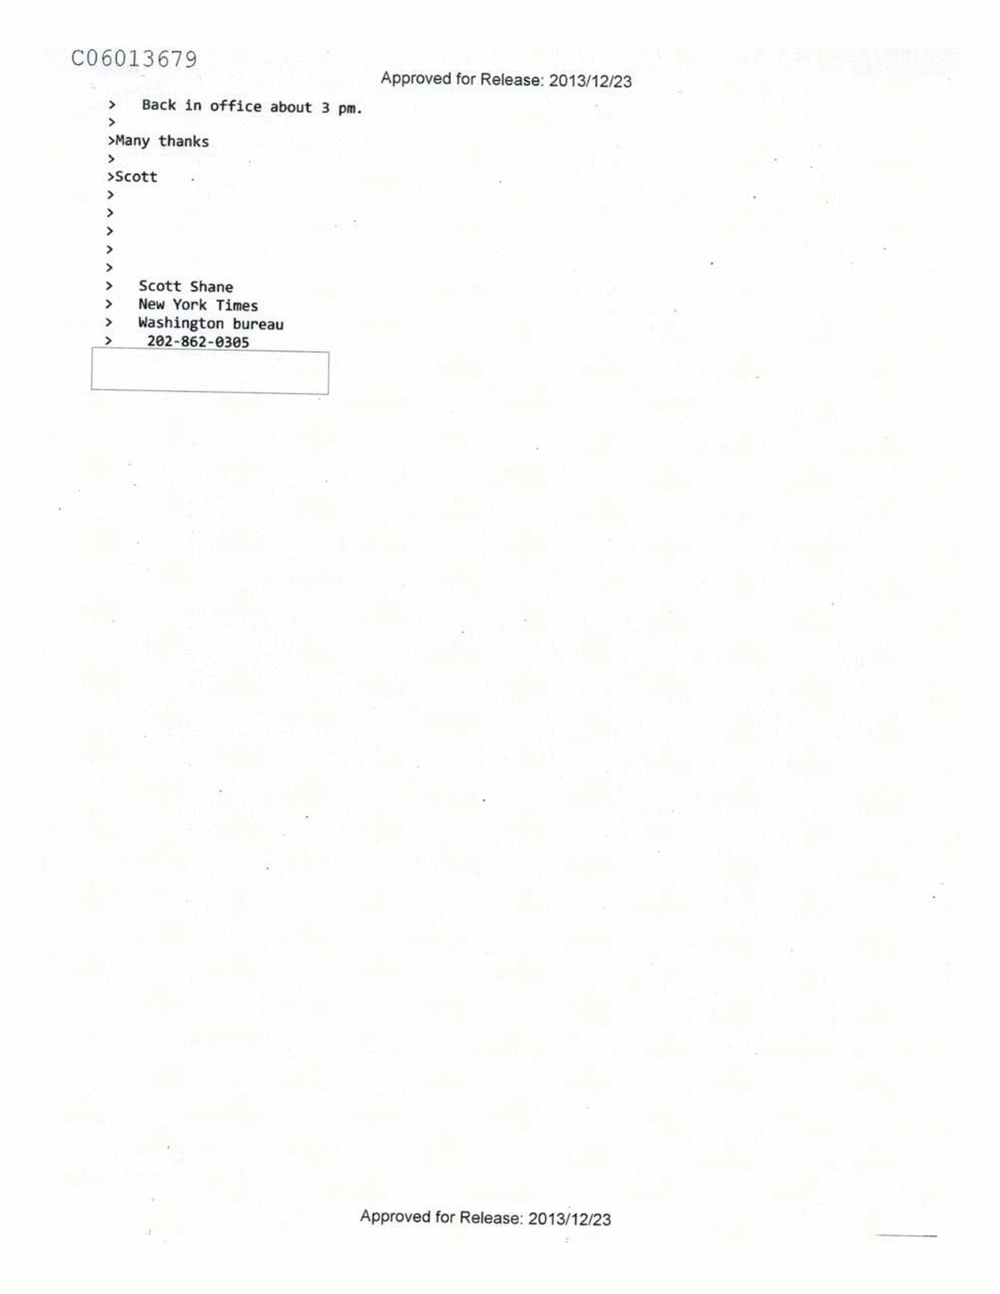 Page 536 from Email Correspondence Between Reporters and CIA Flacks